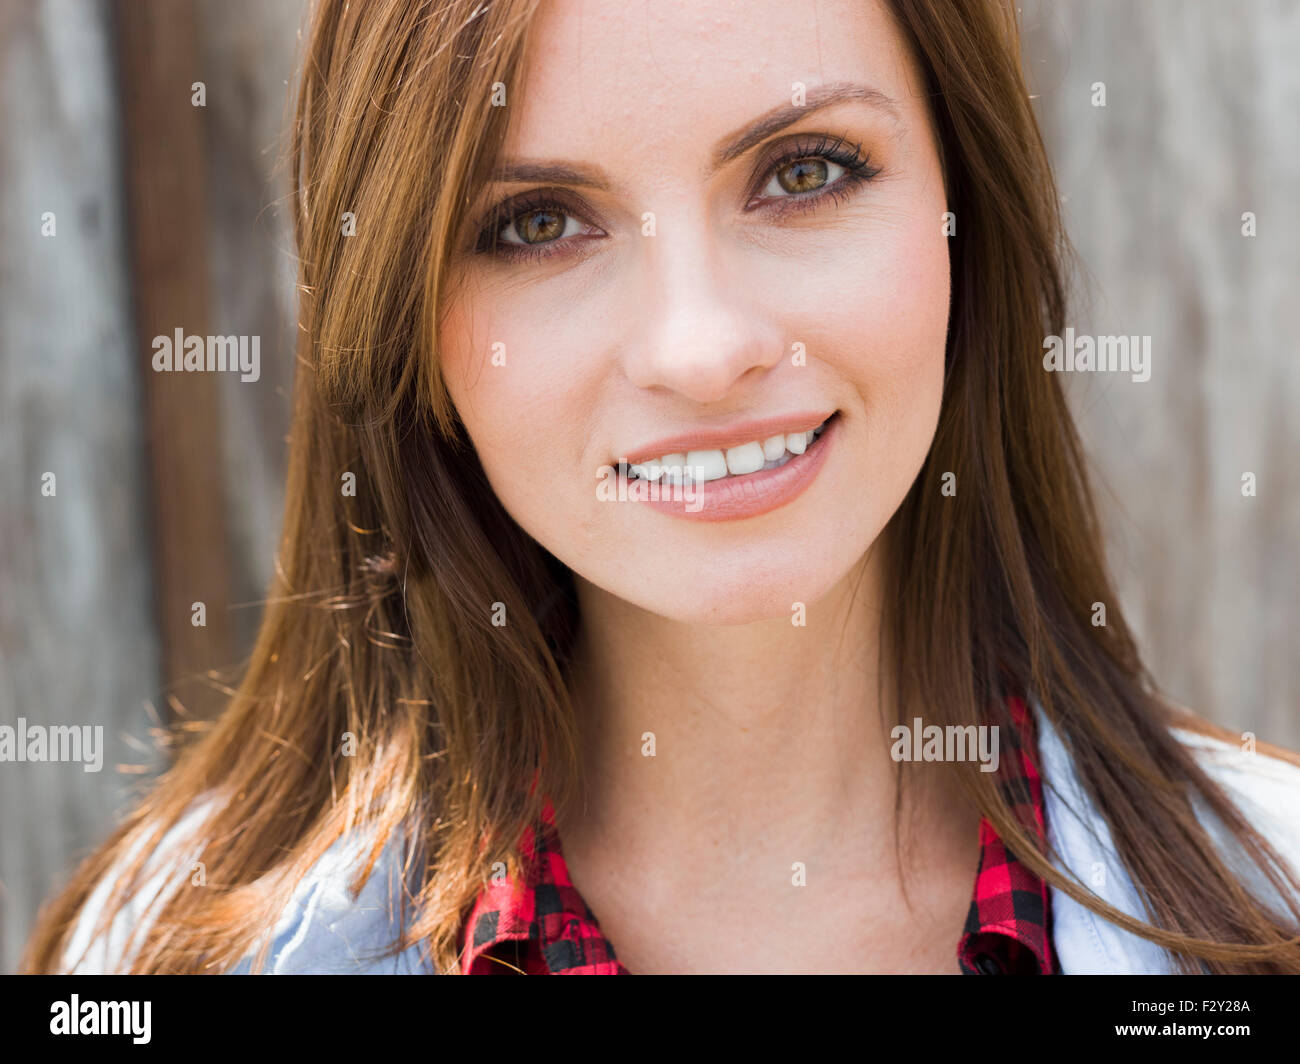 A beautiful woman with brown eyes and brown hair. Stock Photo